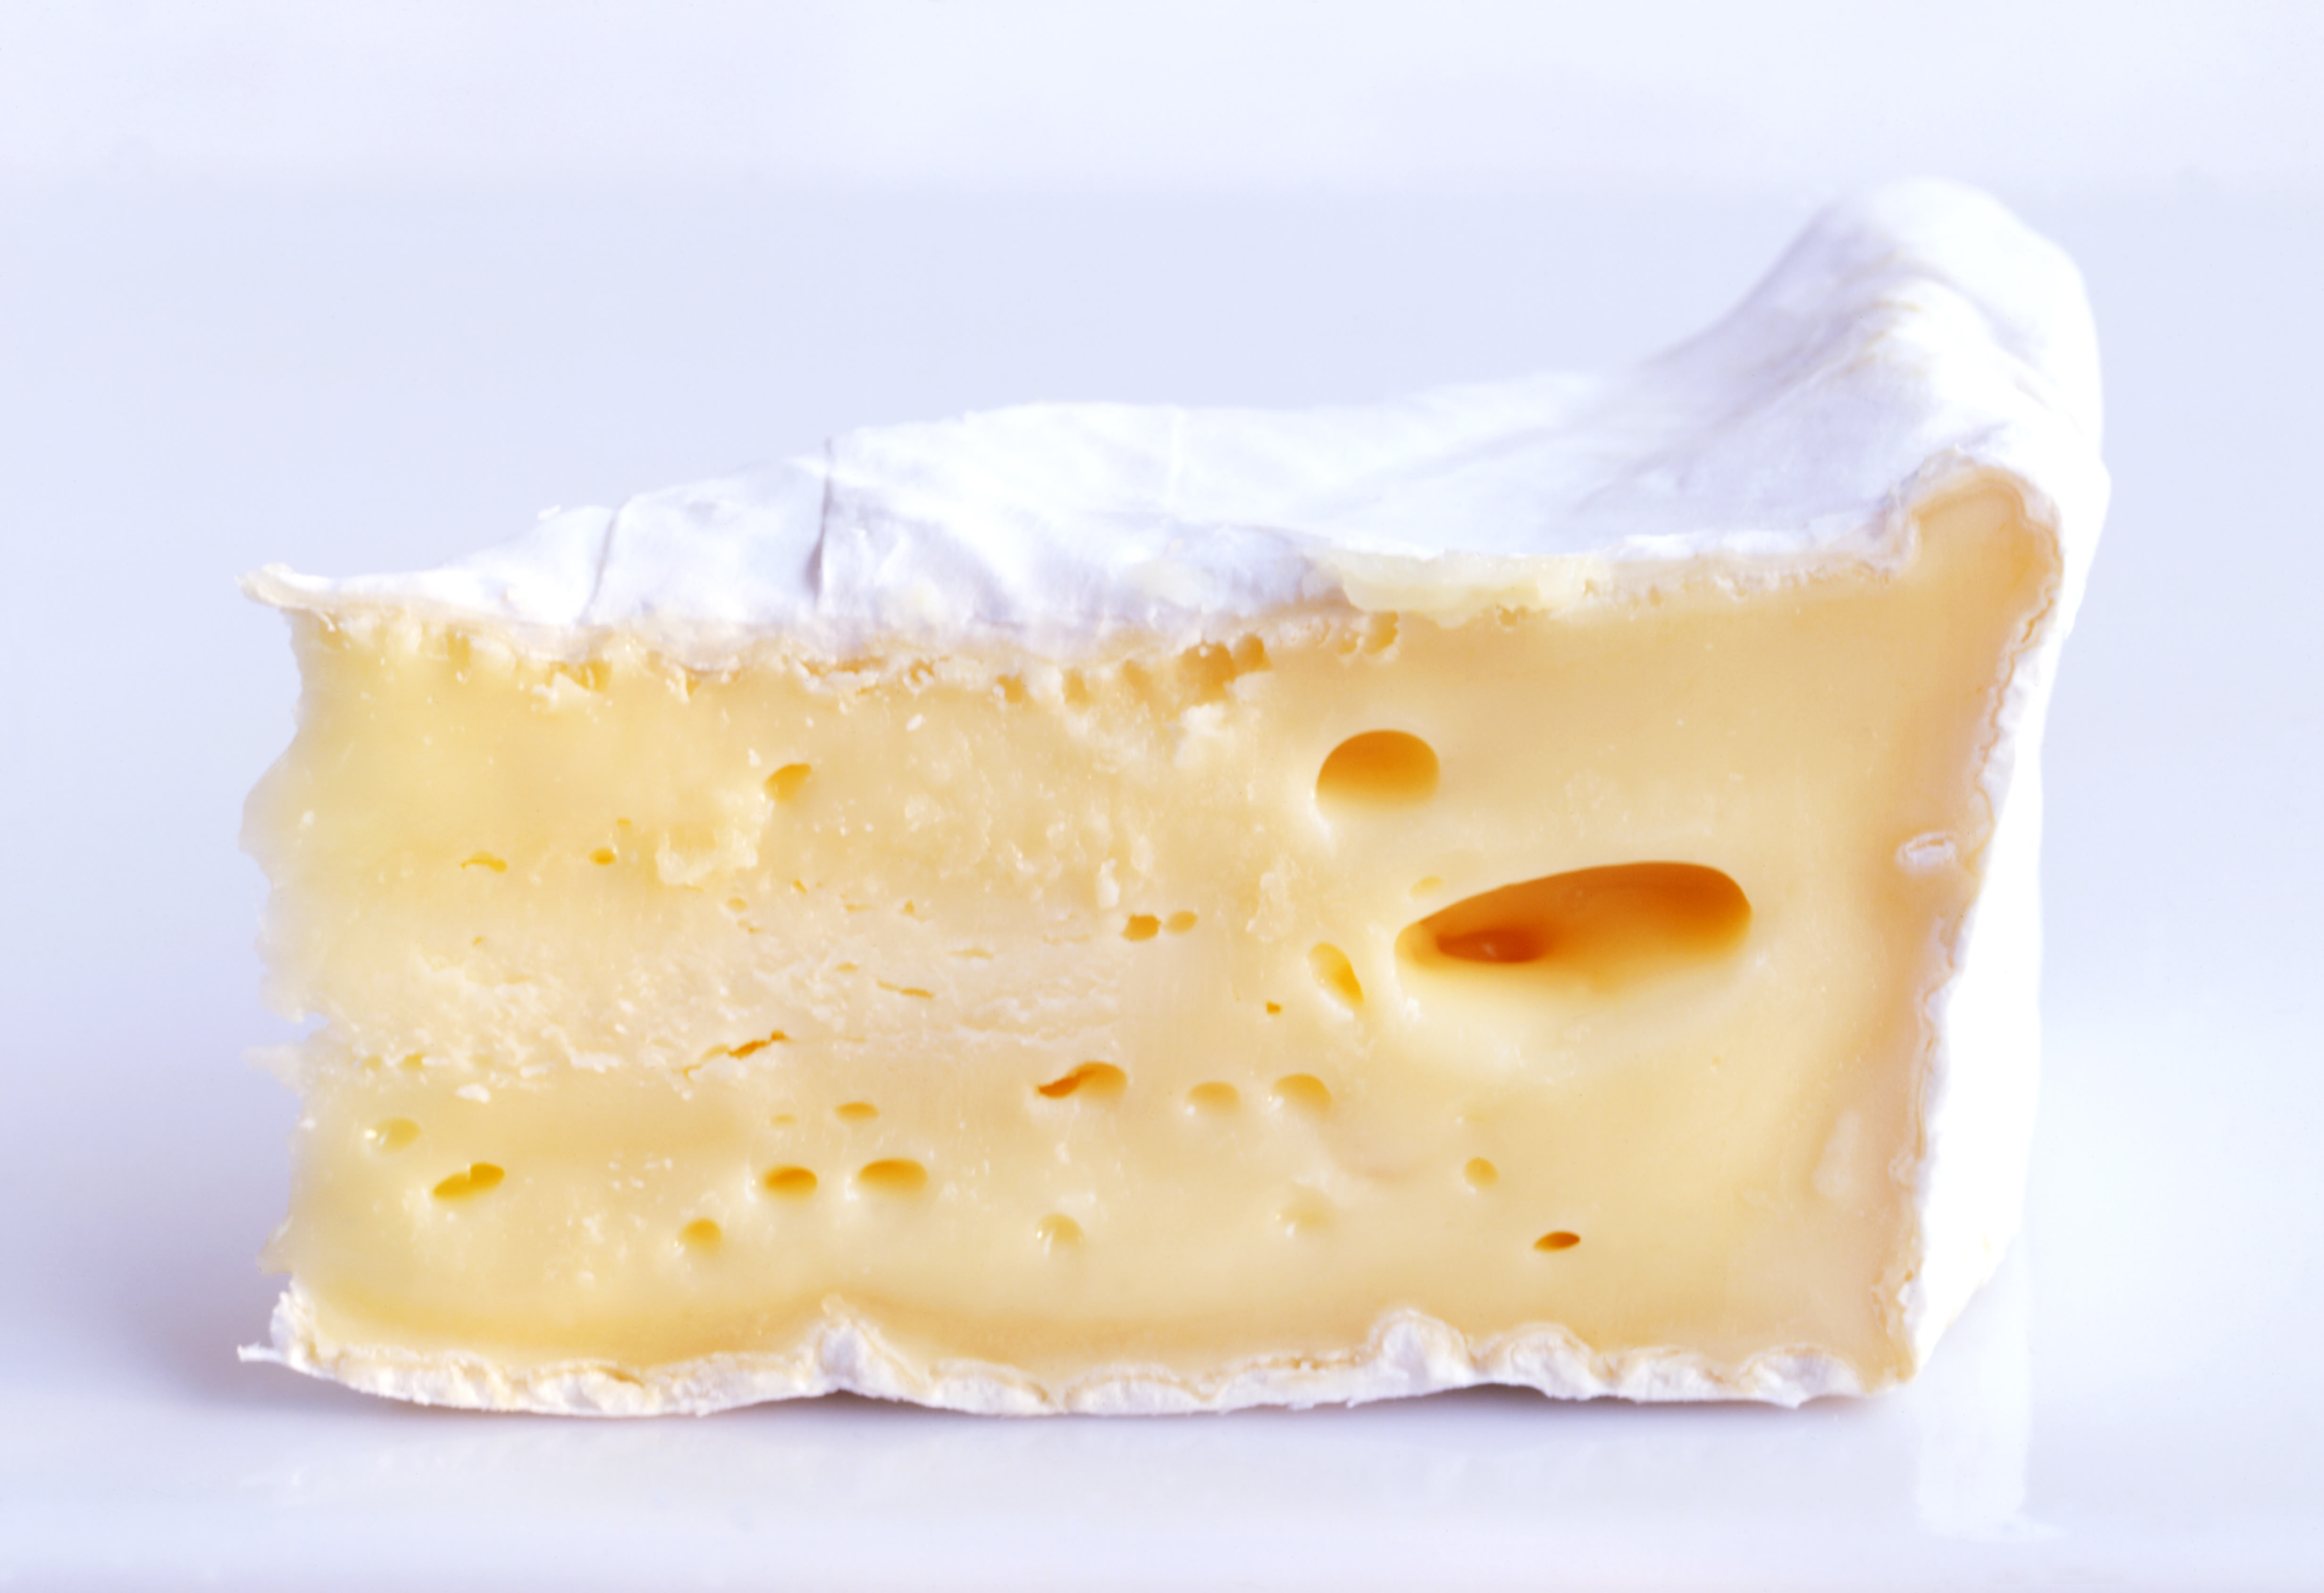 Other potentially addictive properties of cheese